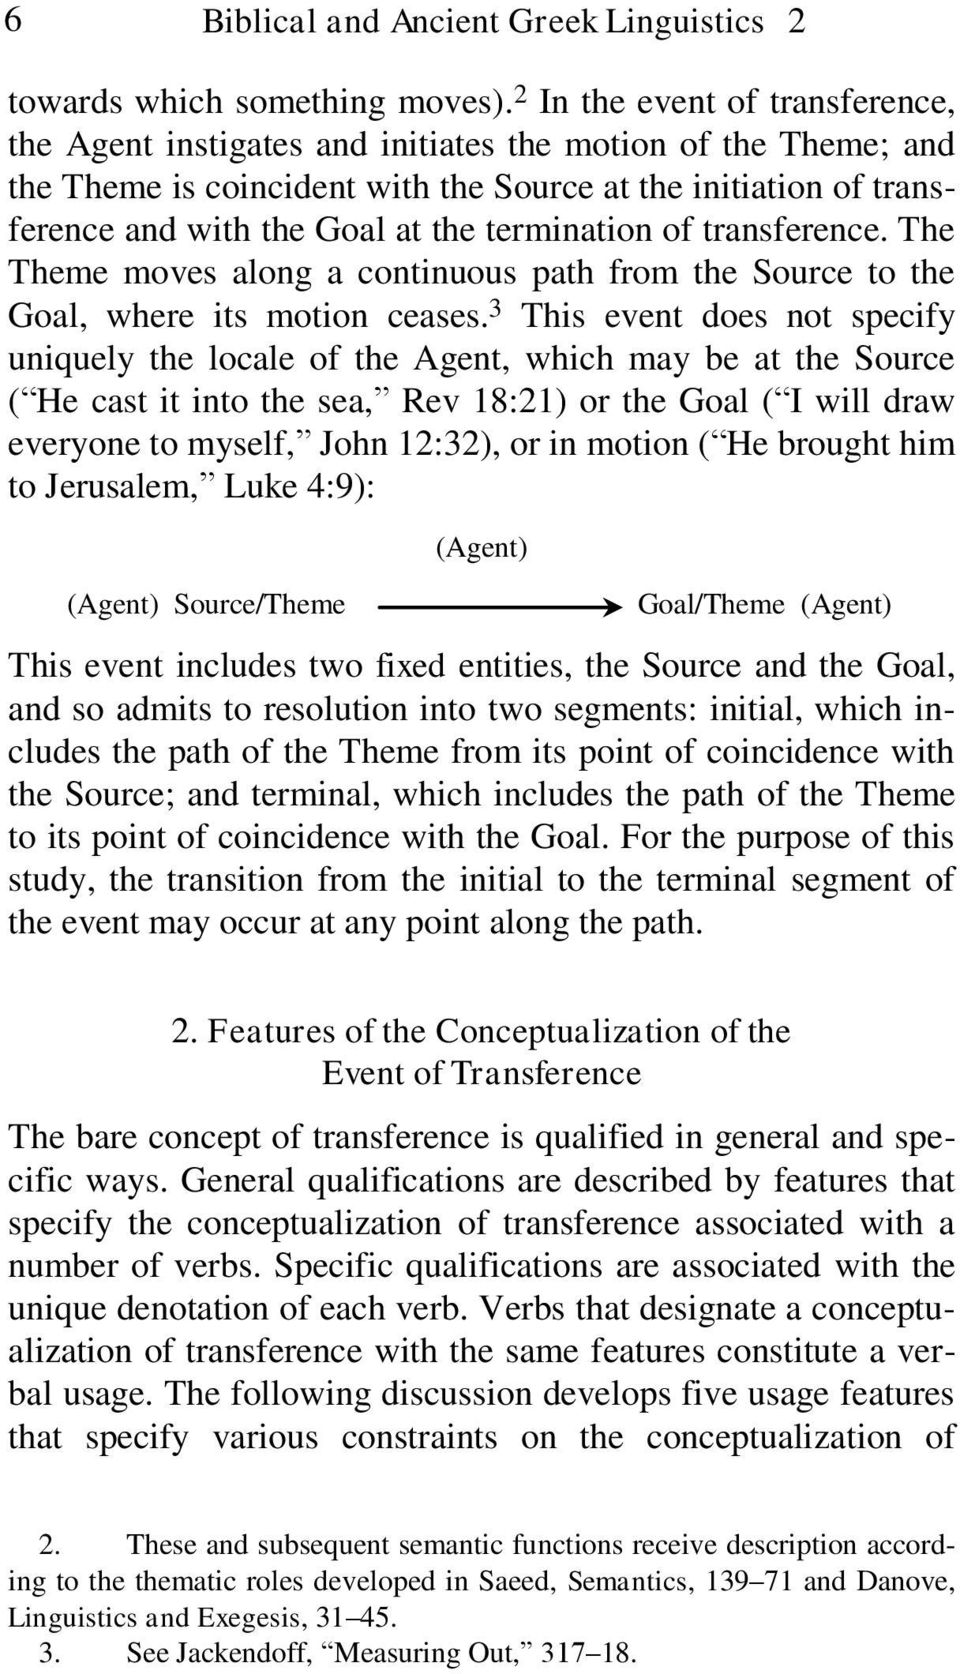 termination of transference. The Theme moves along a continuous path from the Source to the Goal, where its motion ceases.